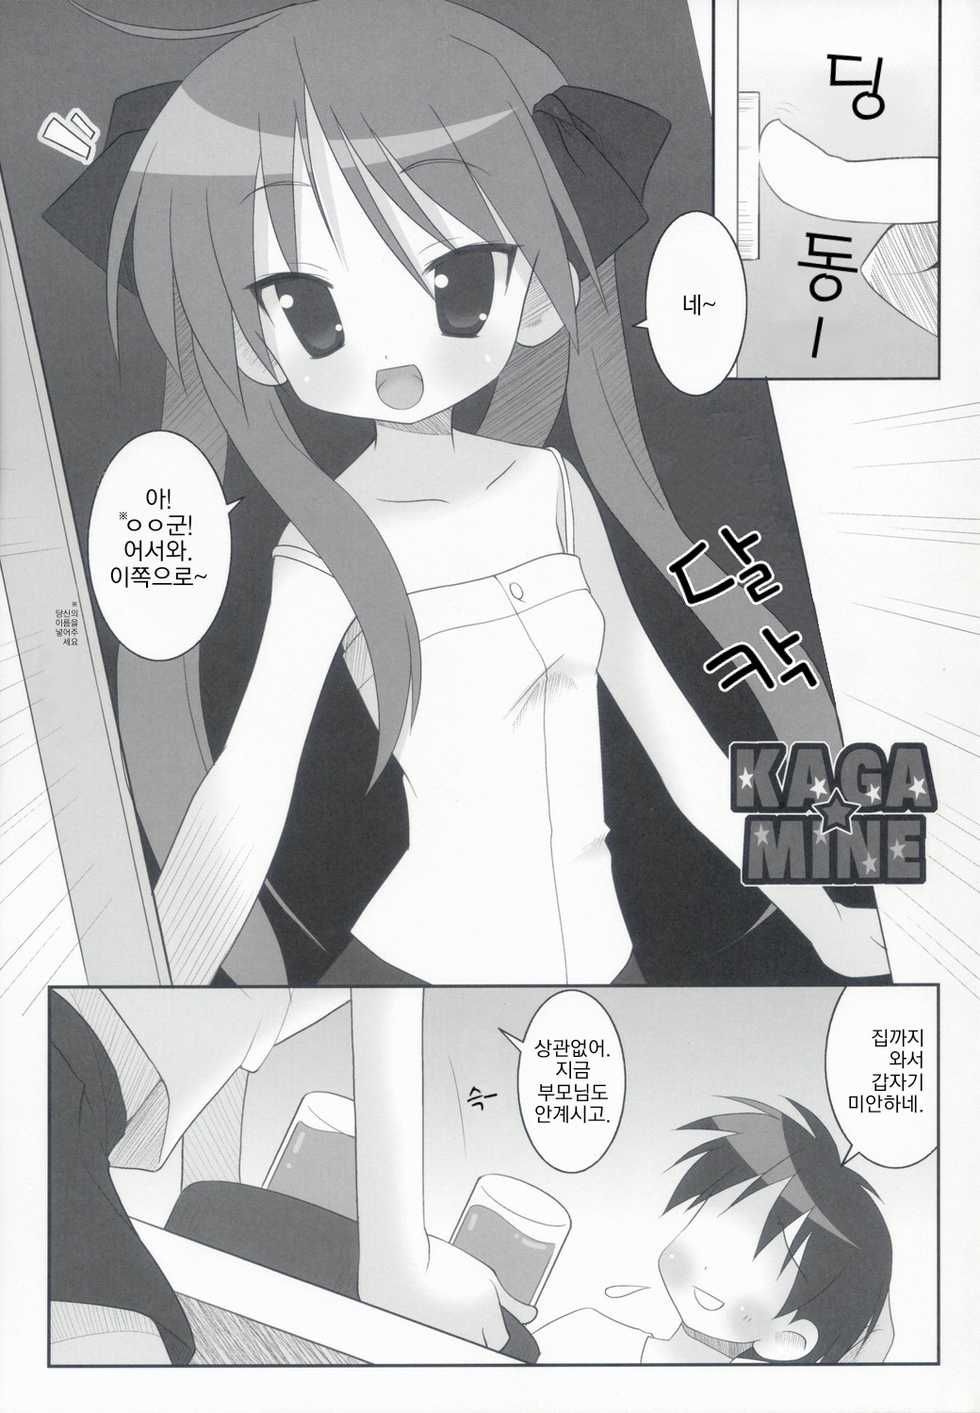 (Puniket 15) [Oden-Ya (Misooden)] KAGA MINE (Lucky Star) [Korean] [딸기실업] - Page 4